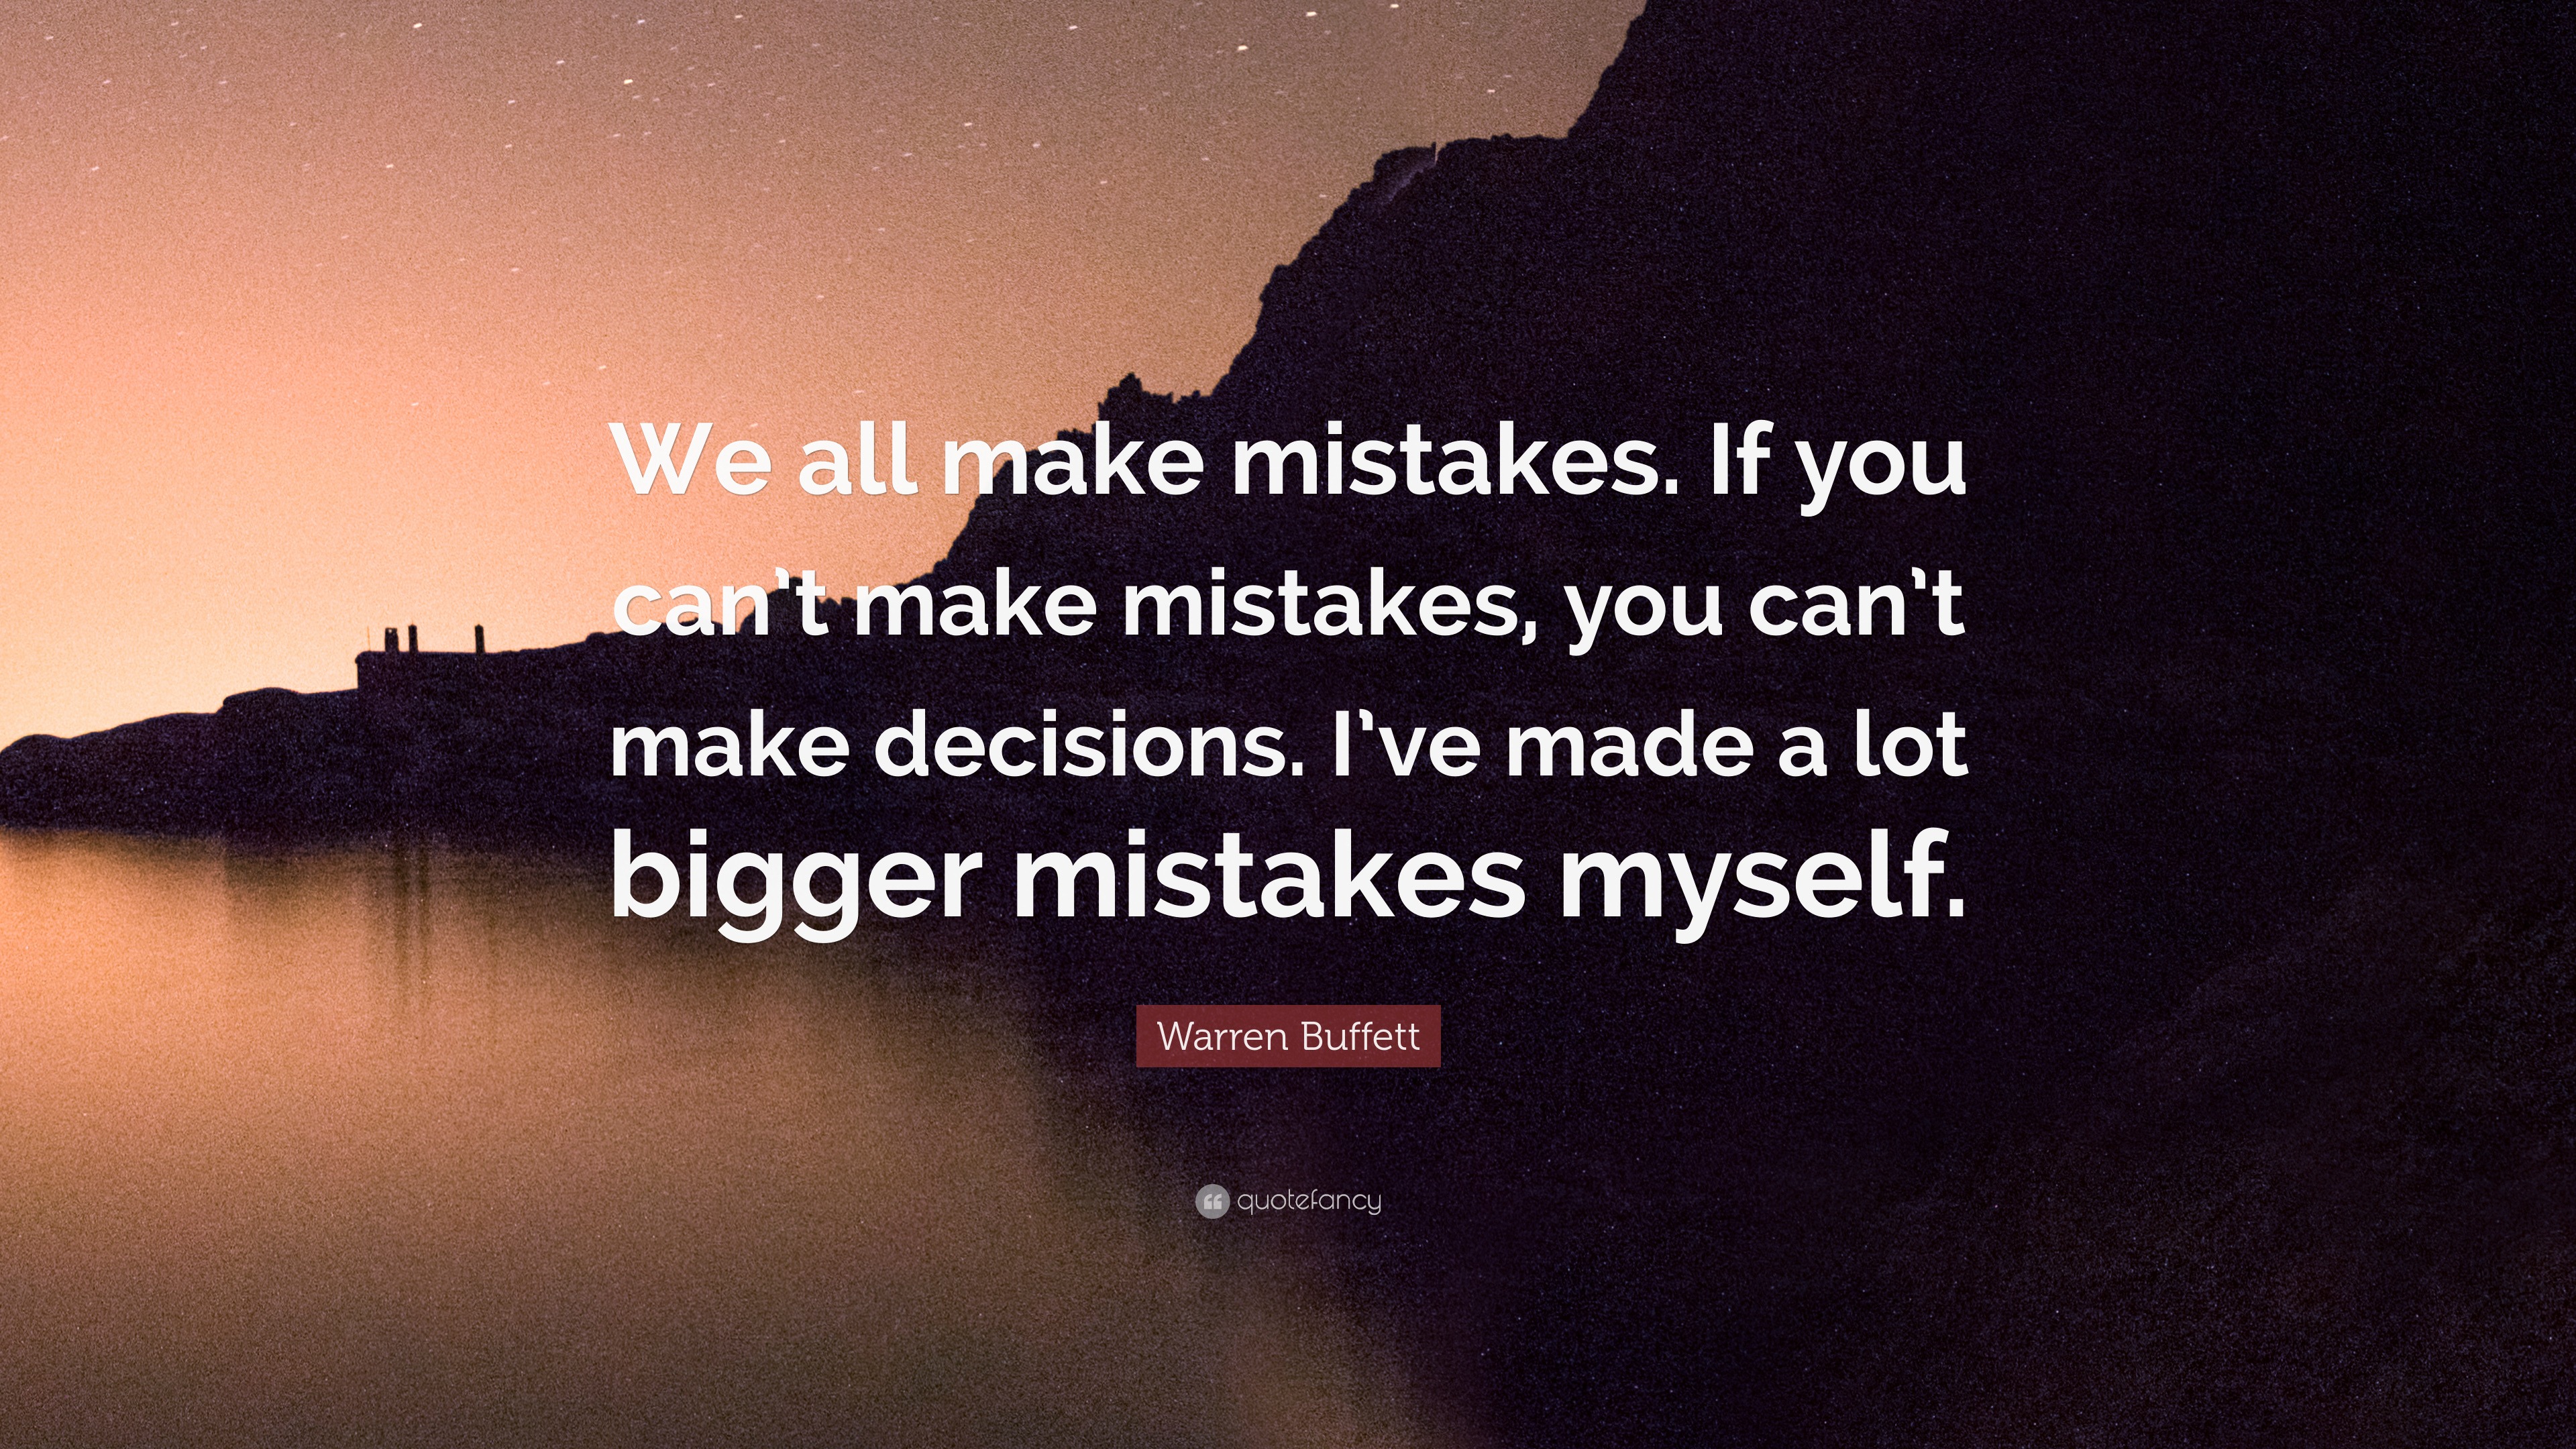 Warren Buffett Quote: “We all make mistakes. If you can’t make mistakes ...